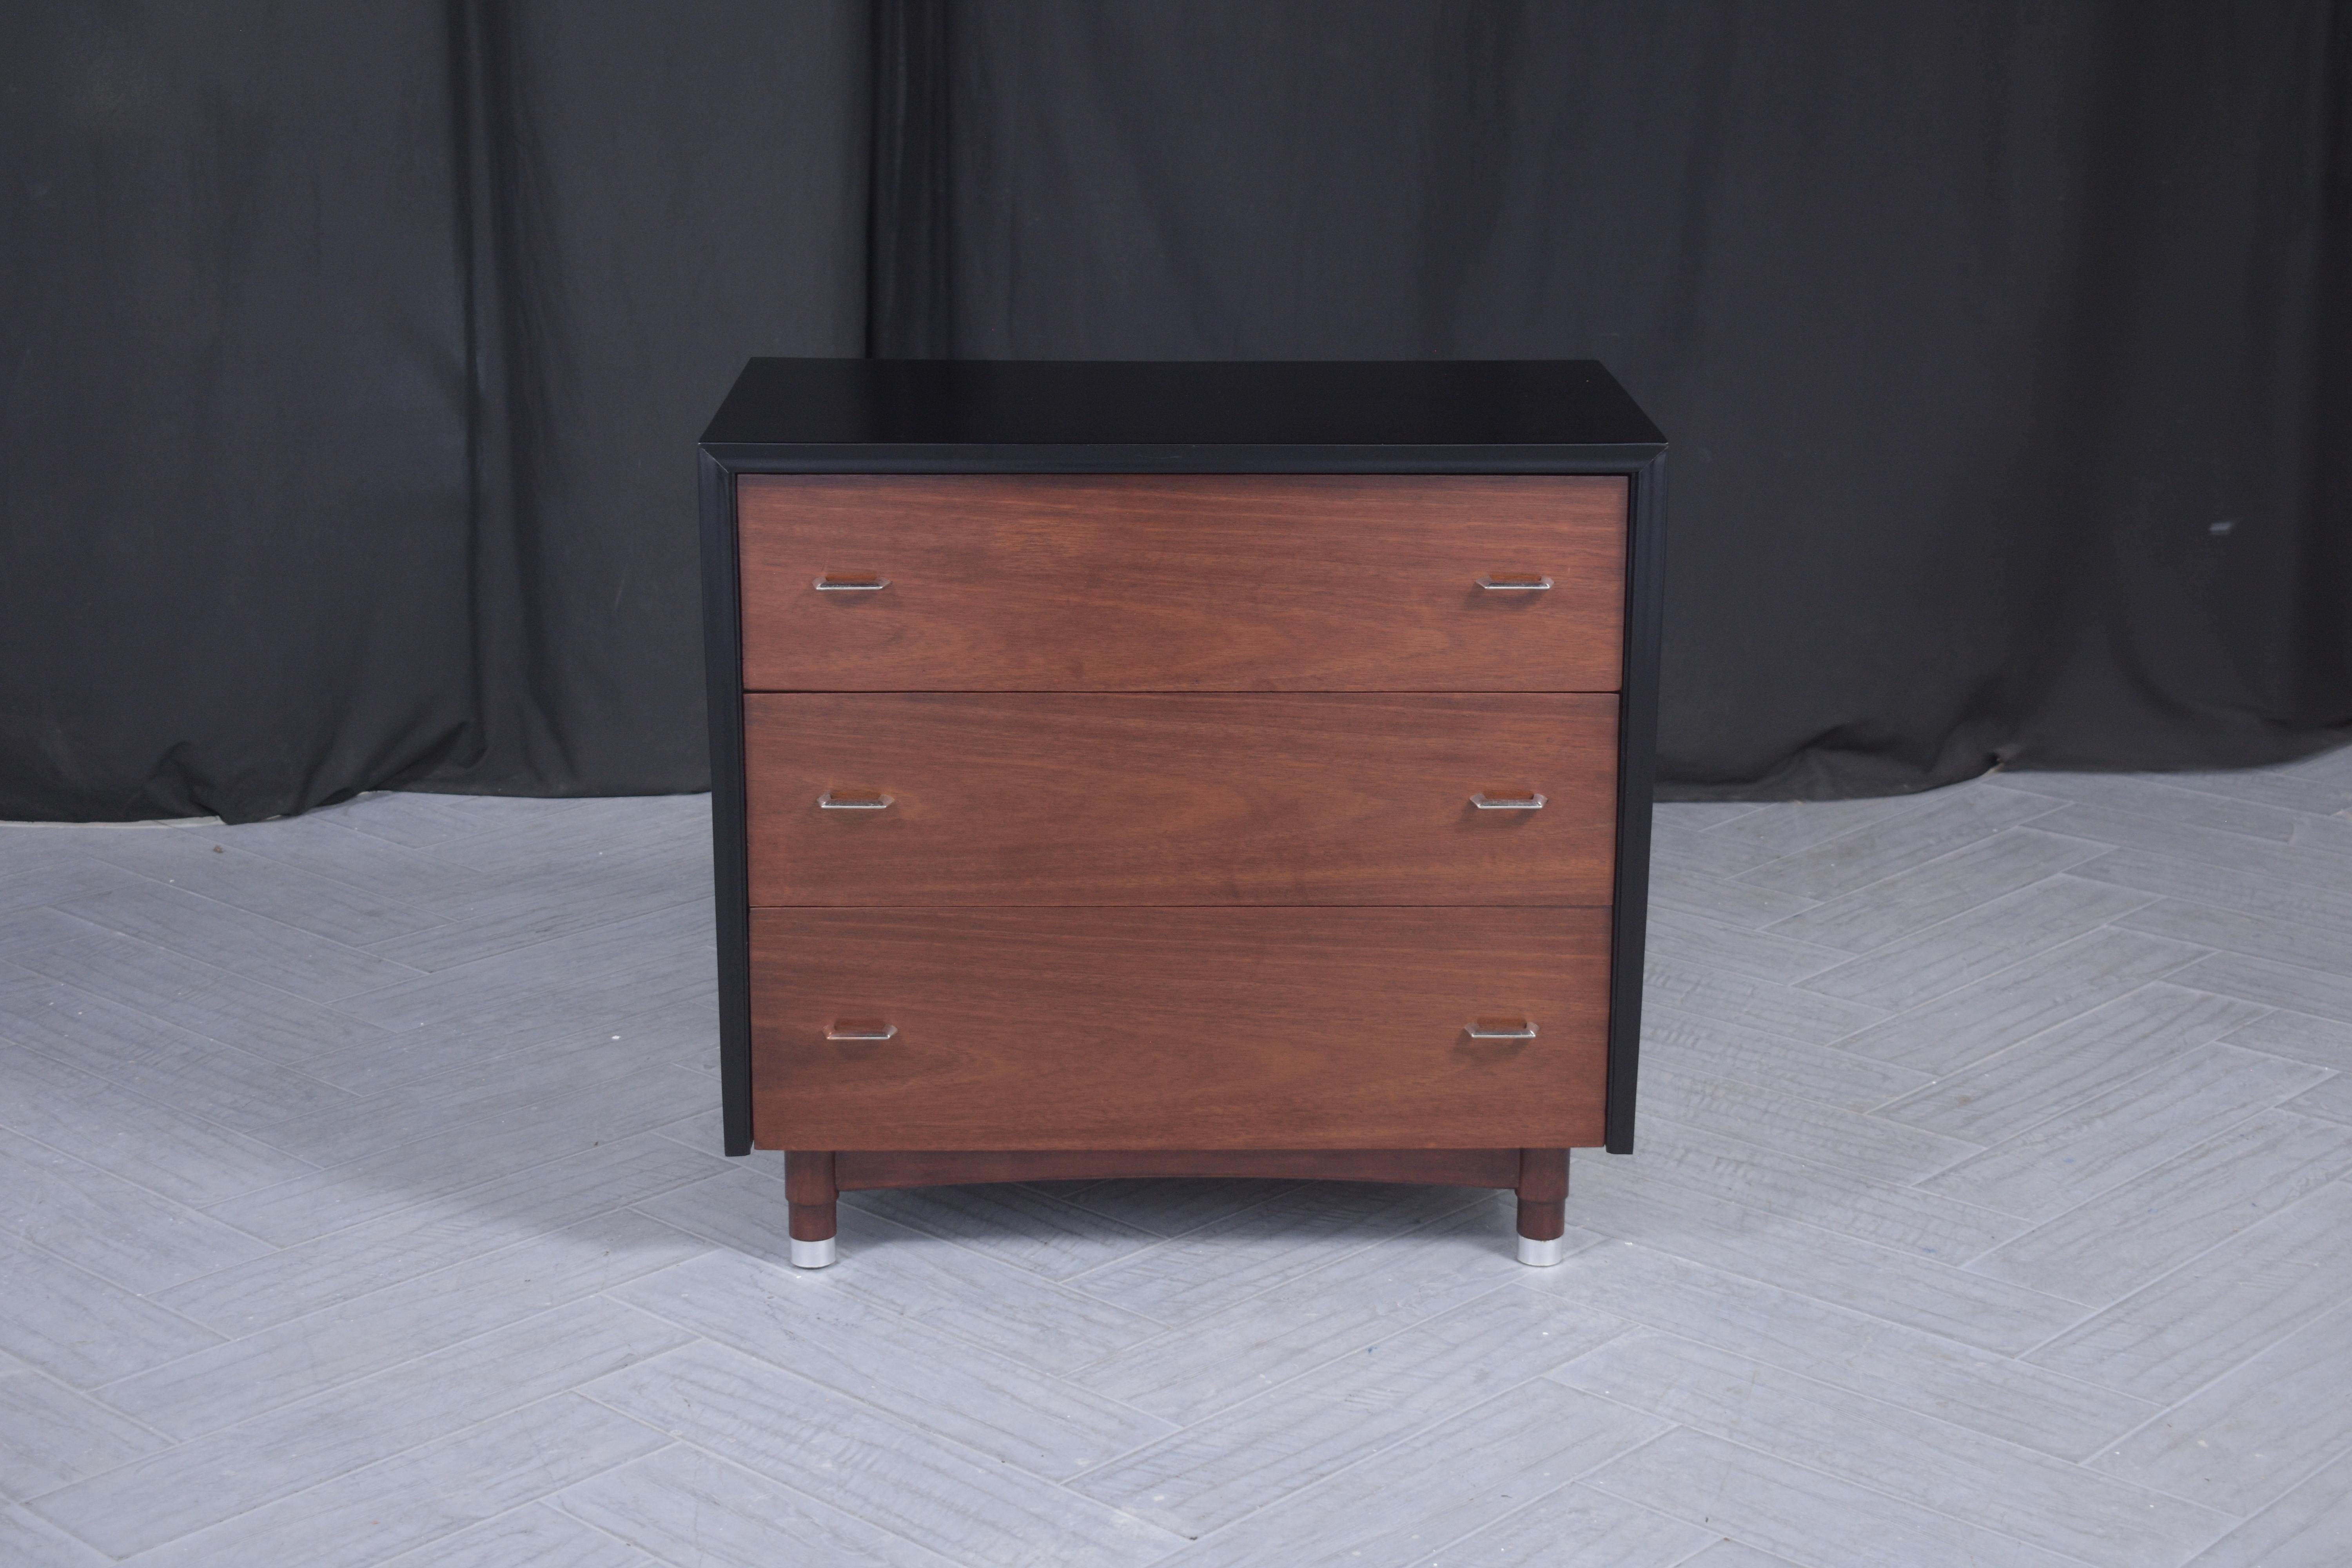 Step into the world of refined vintage style with our beautifully restored Mid-Century Modern Dresser, a hallmark of the iconic 1960s era. Artisans have painstakingly revived this dresser, skillfully handcrafting it from premium mahogany wood to